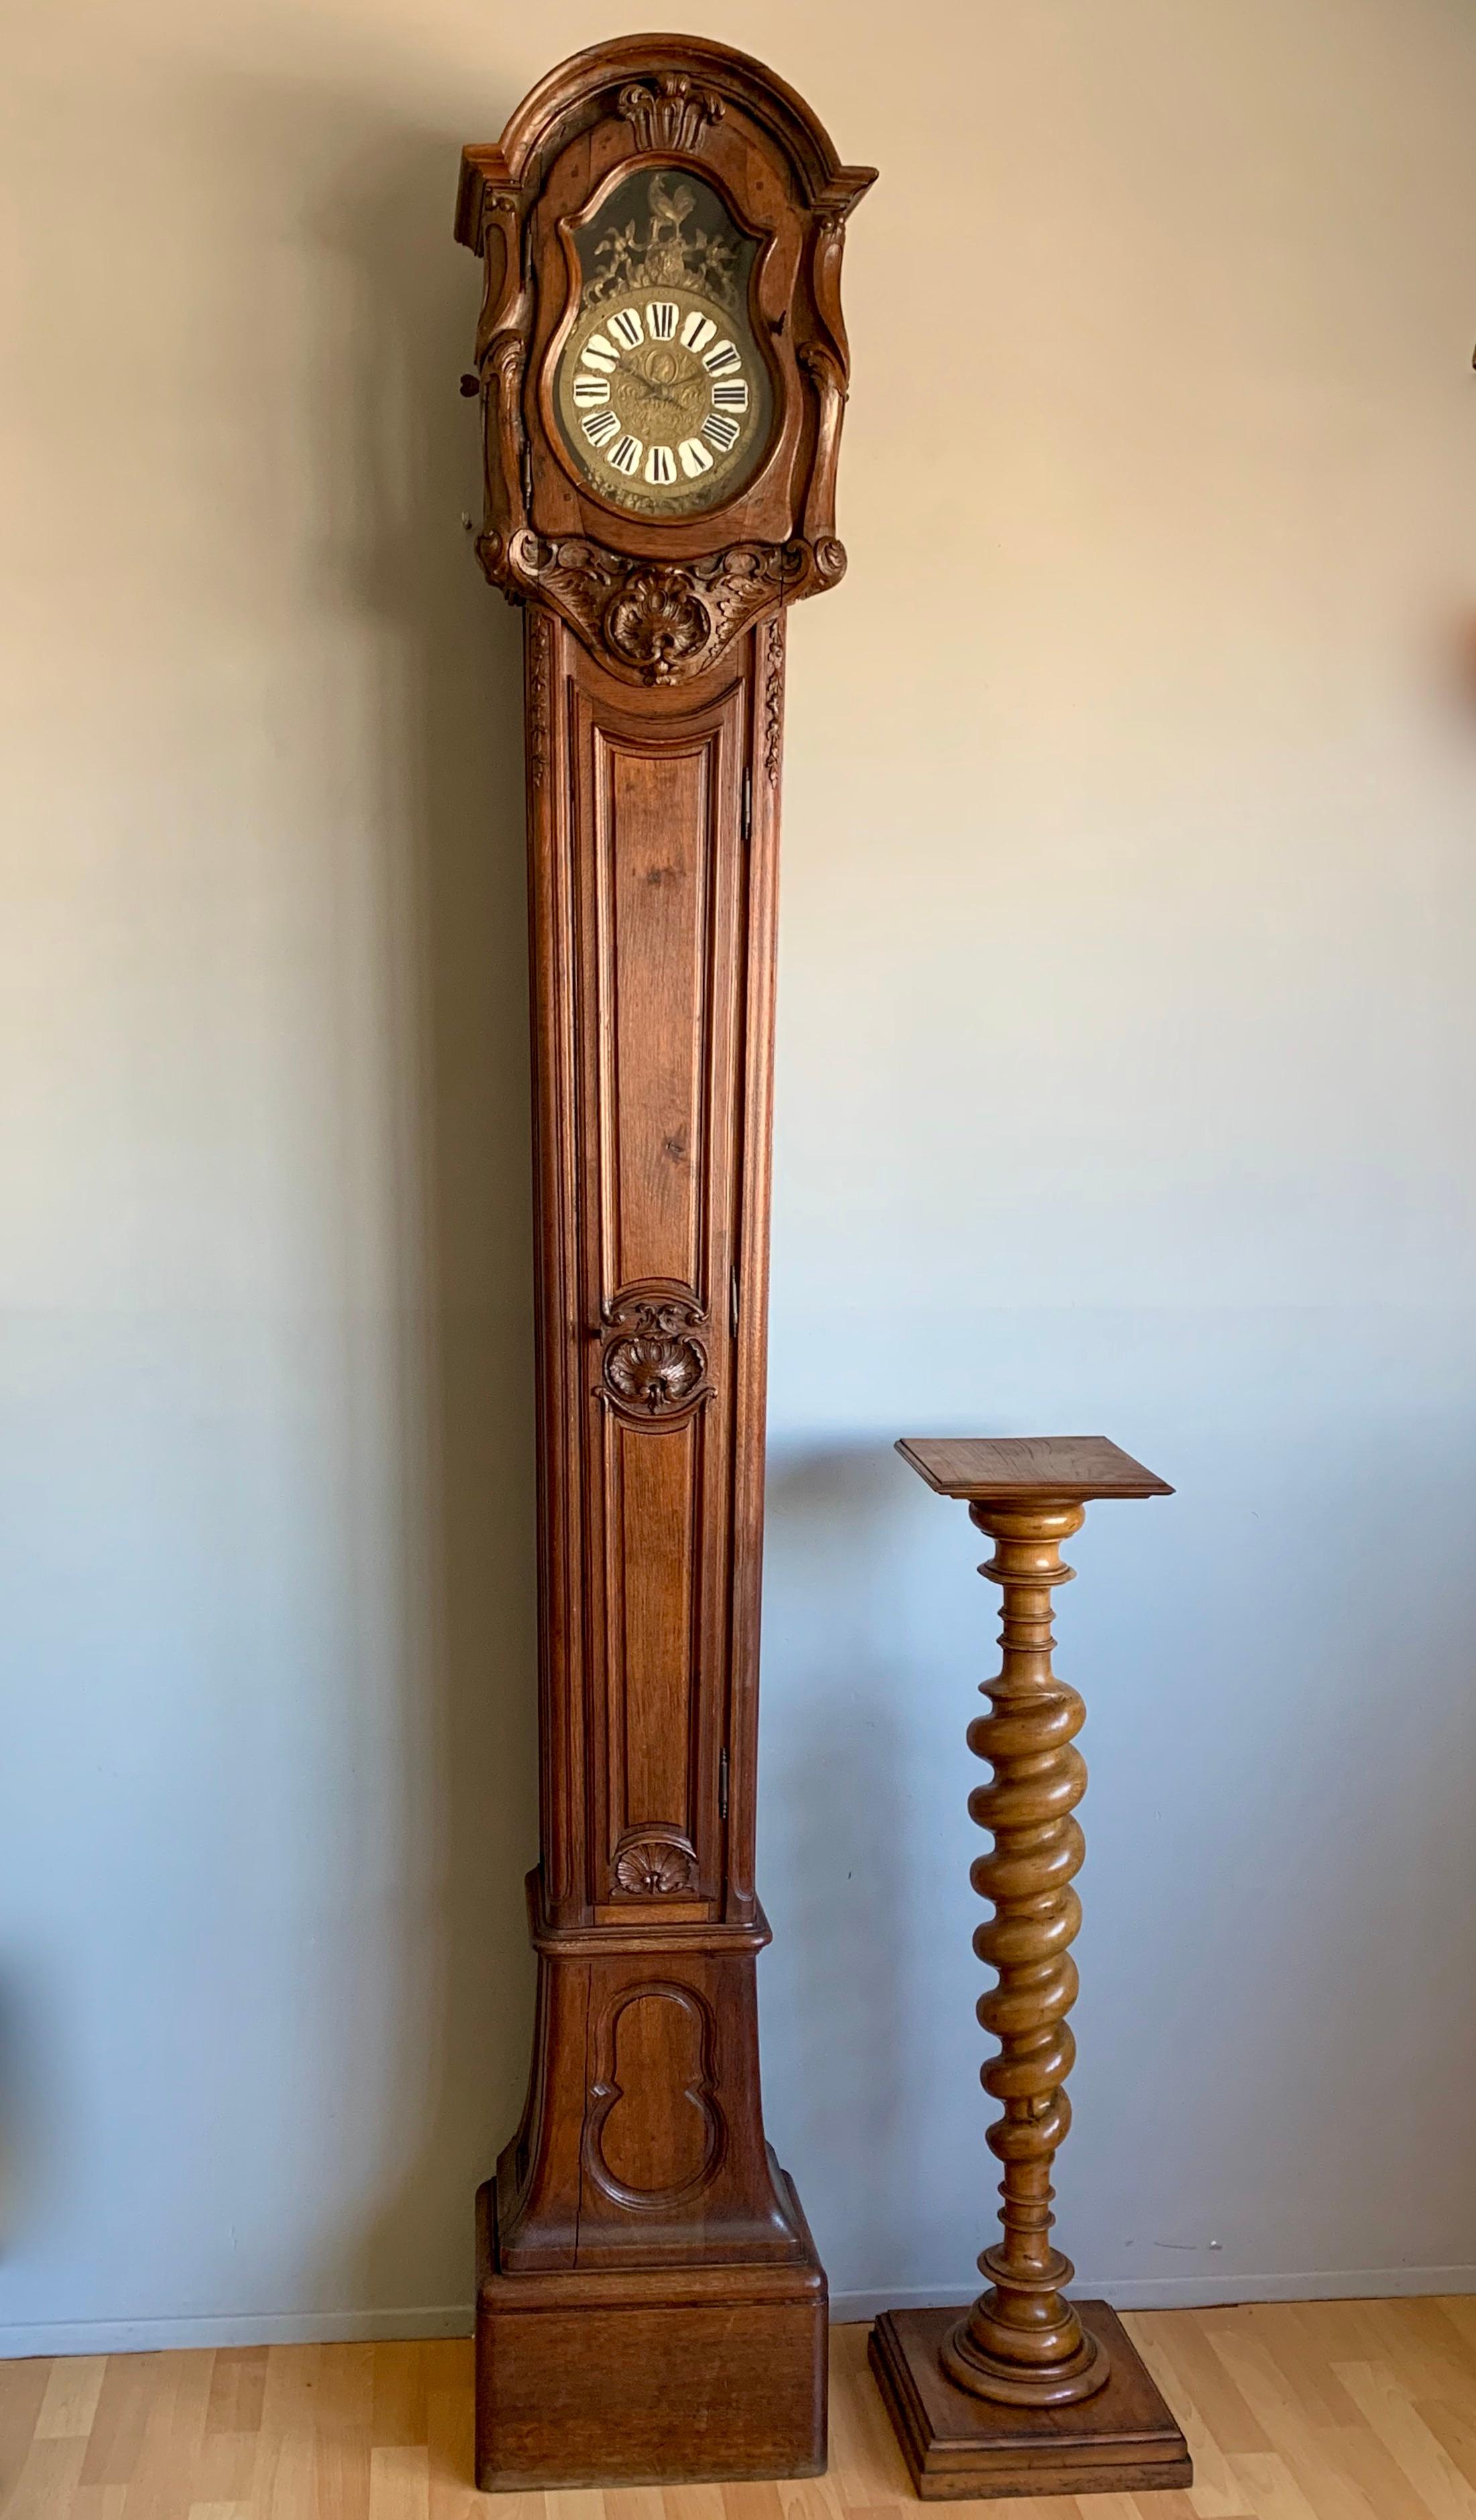 Stunning and completely original, antique oak grandfather or lantern clock, circa 1750.

This very old grandfather clock is one of the tallest we have ever seen and it has an amazingly elegant and slim design. It also features some of the most